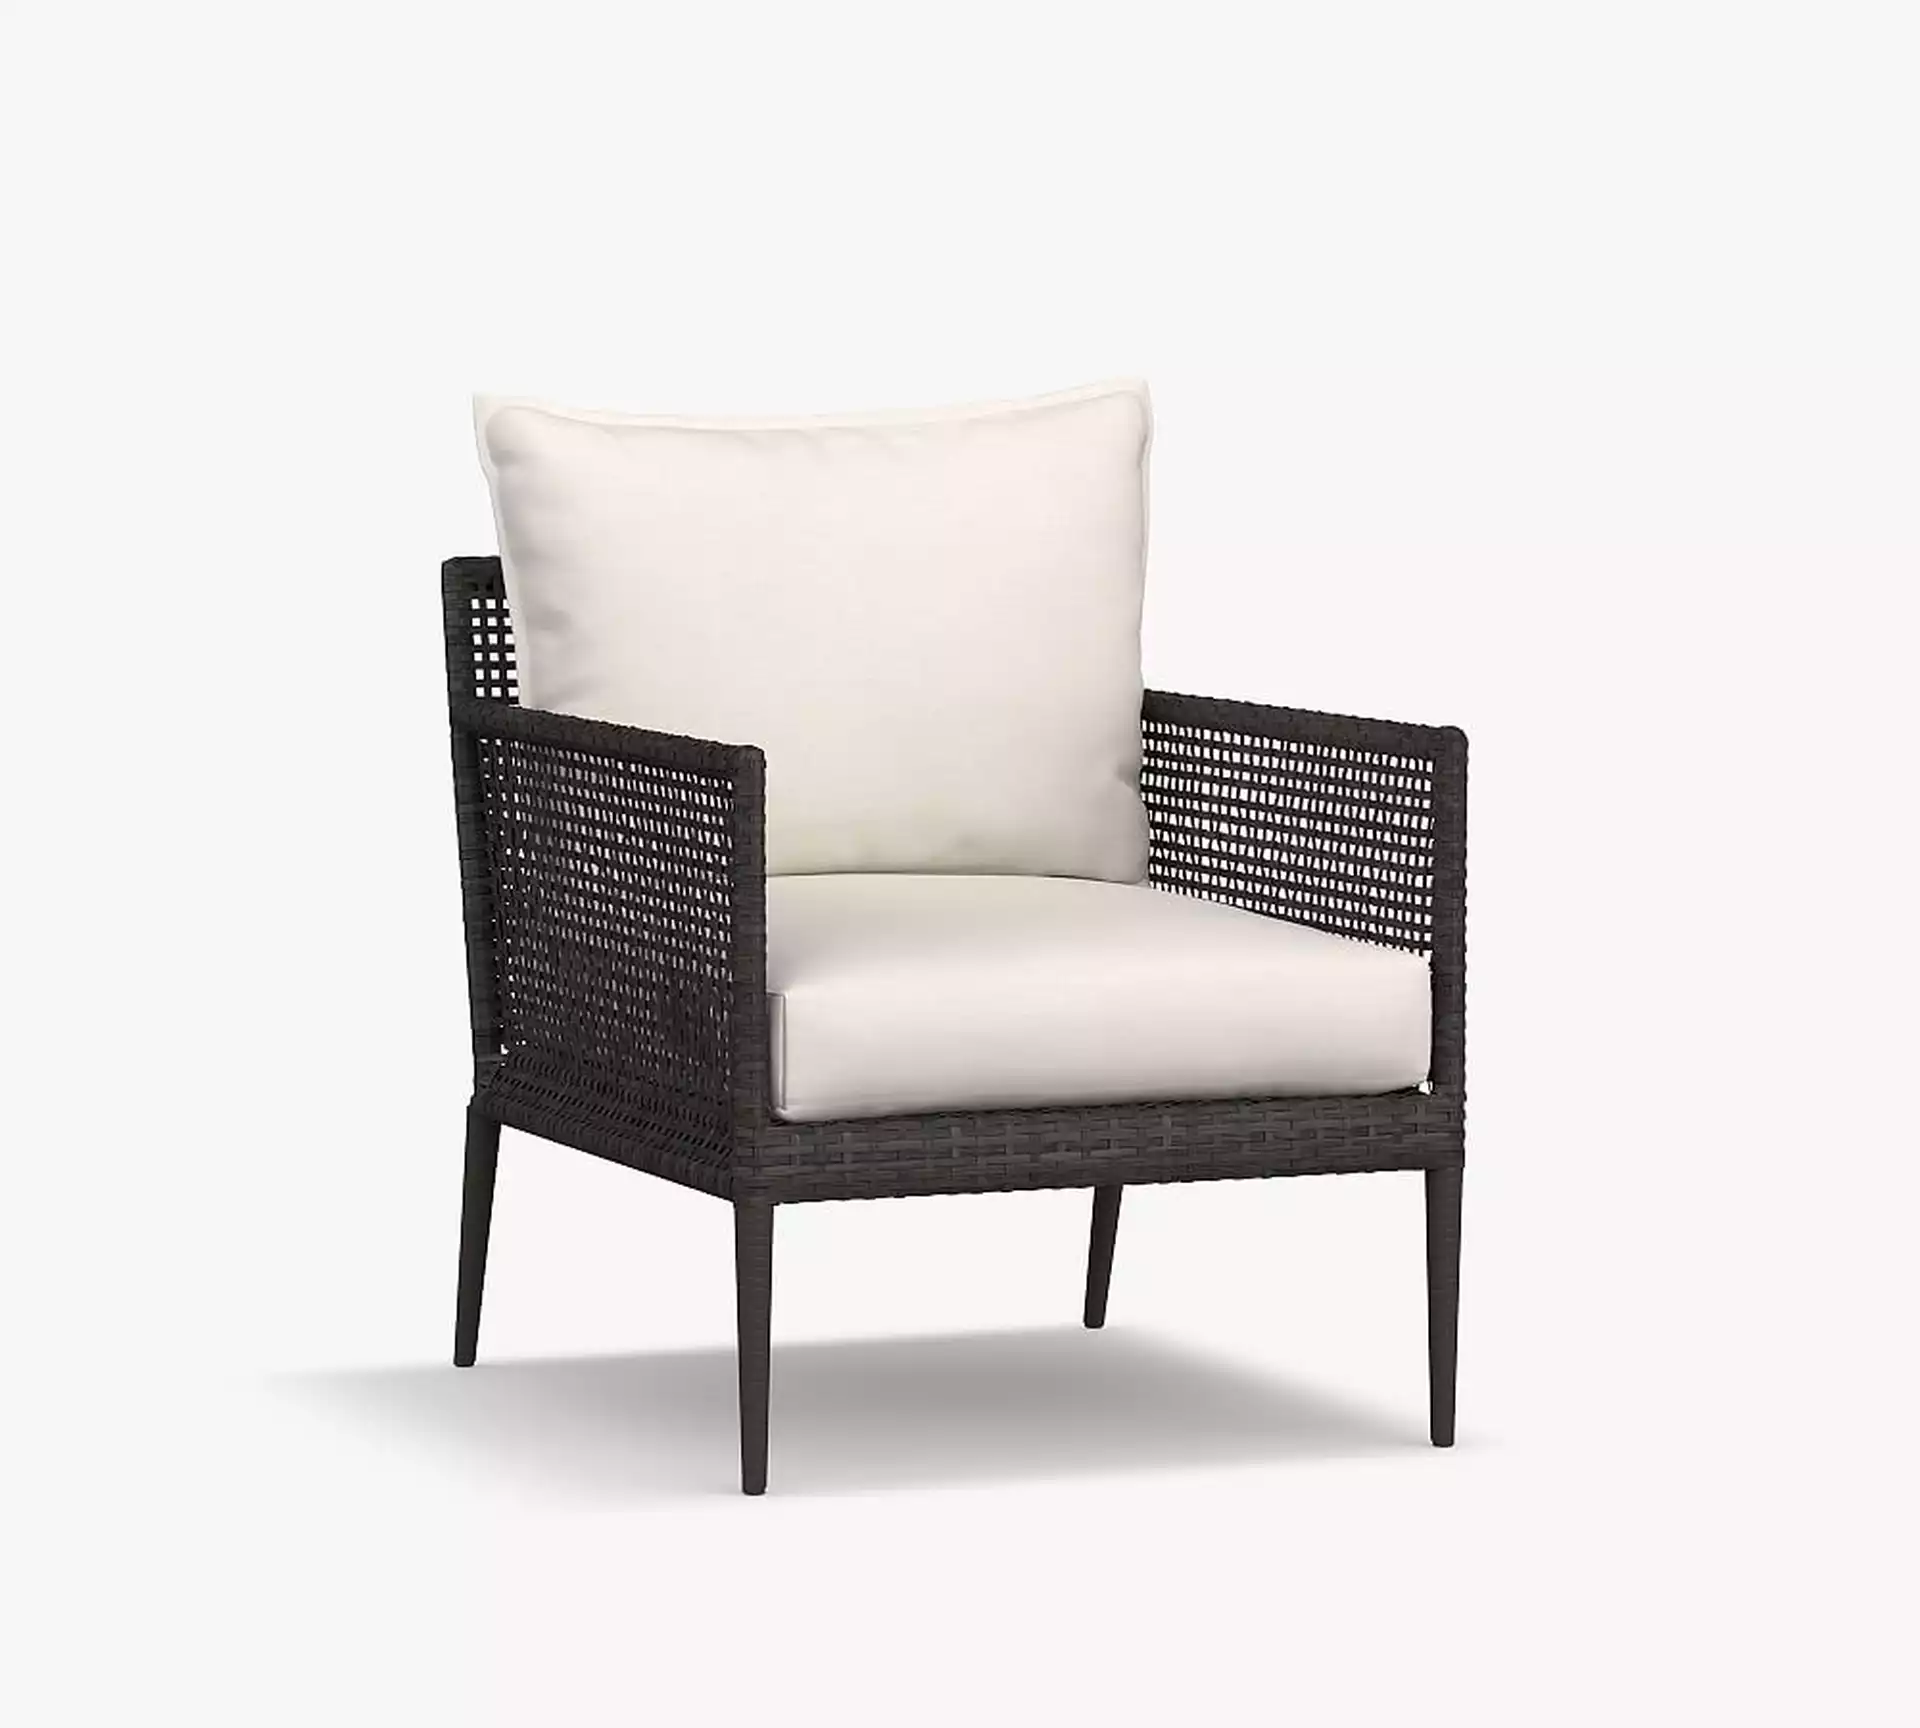 Cammeray Wicker Lounge Chair with Cushion, Black